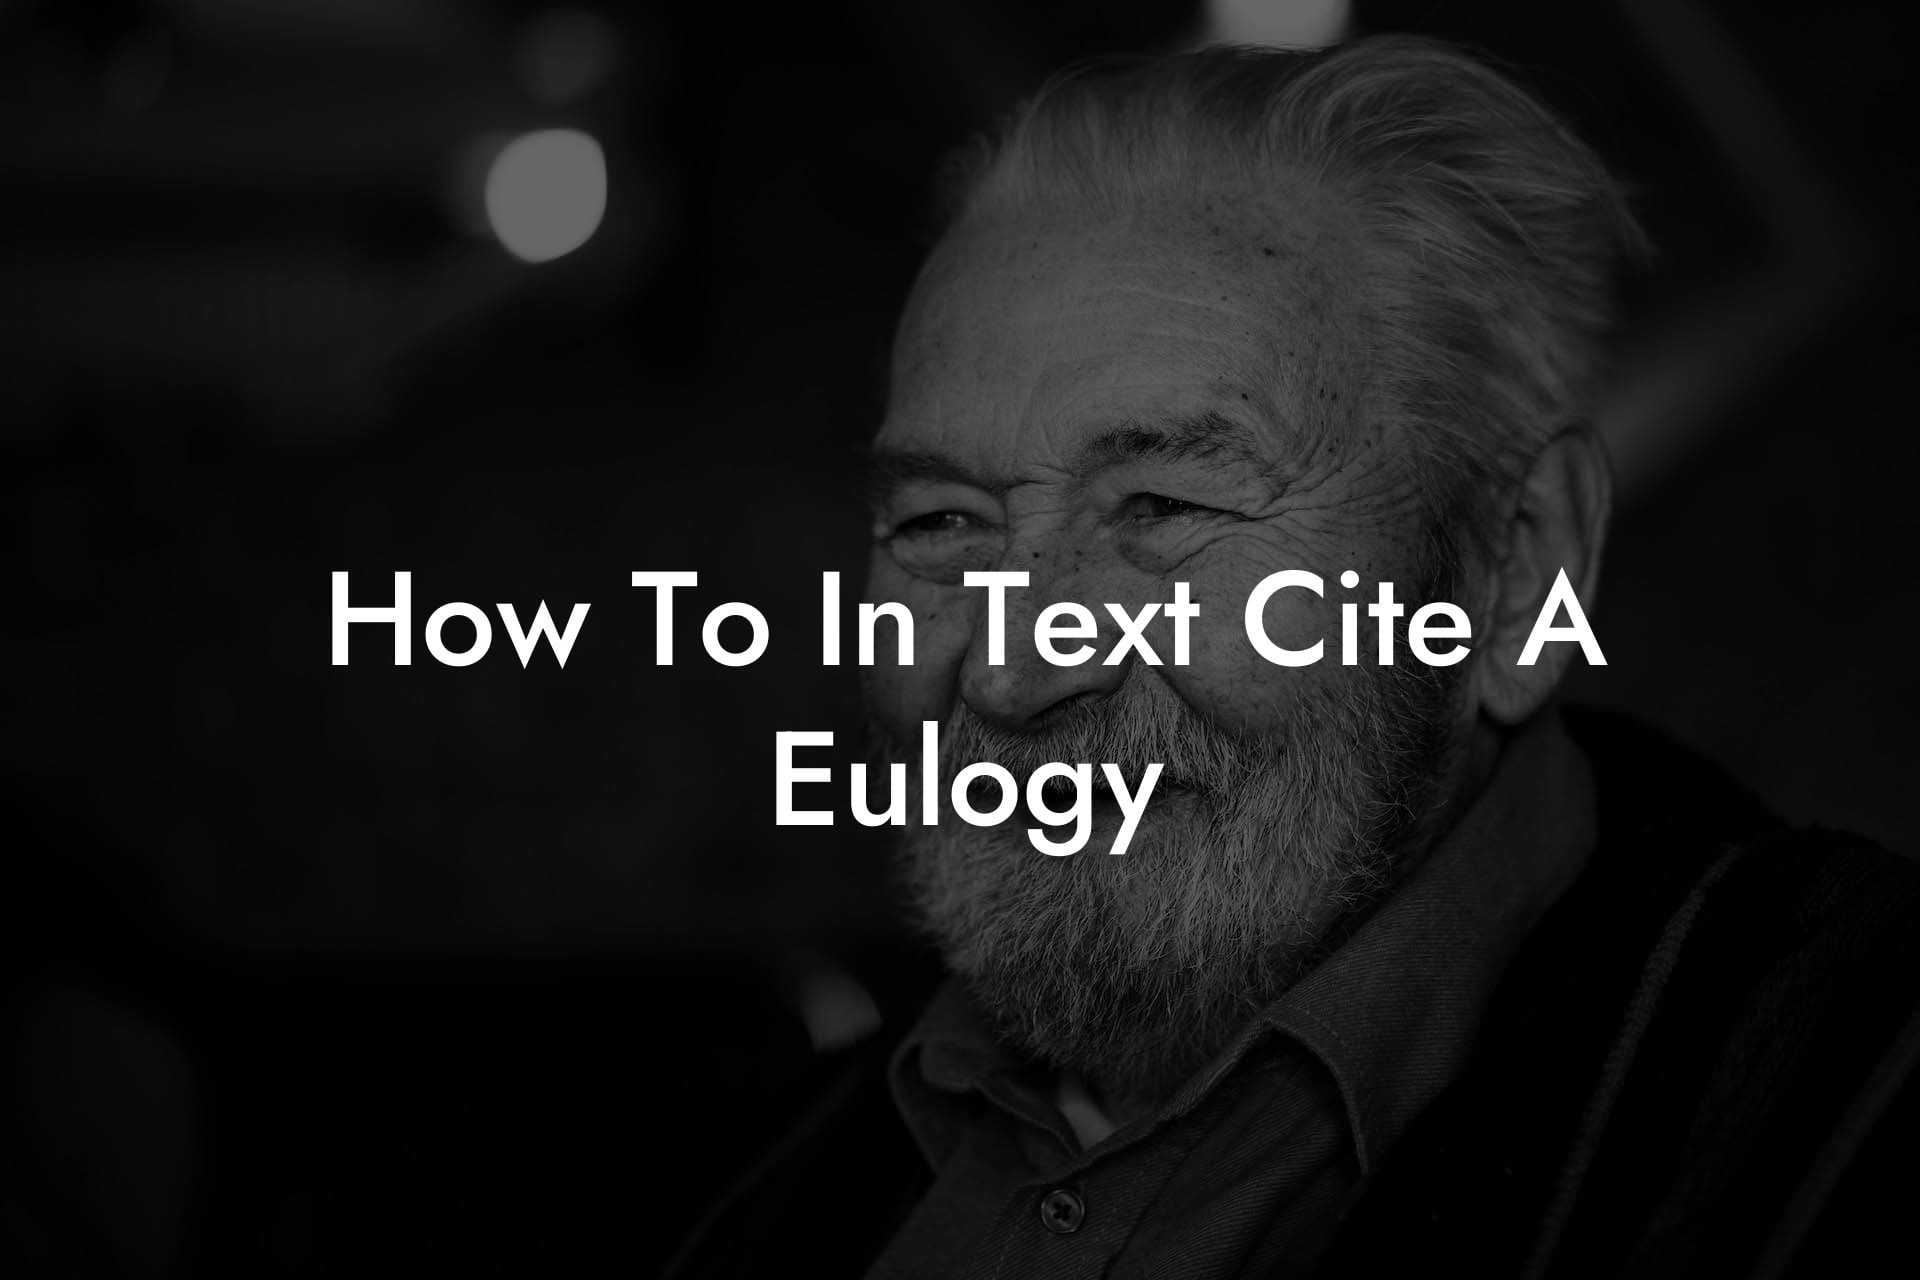 How To In Text Cite A Eulogy